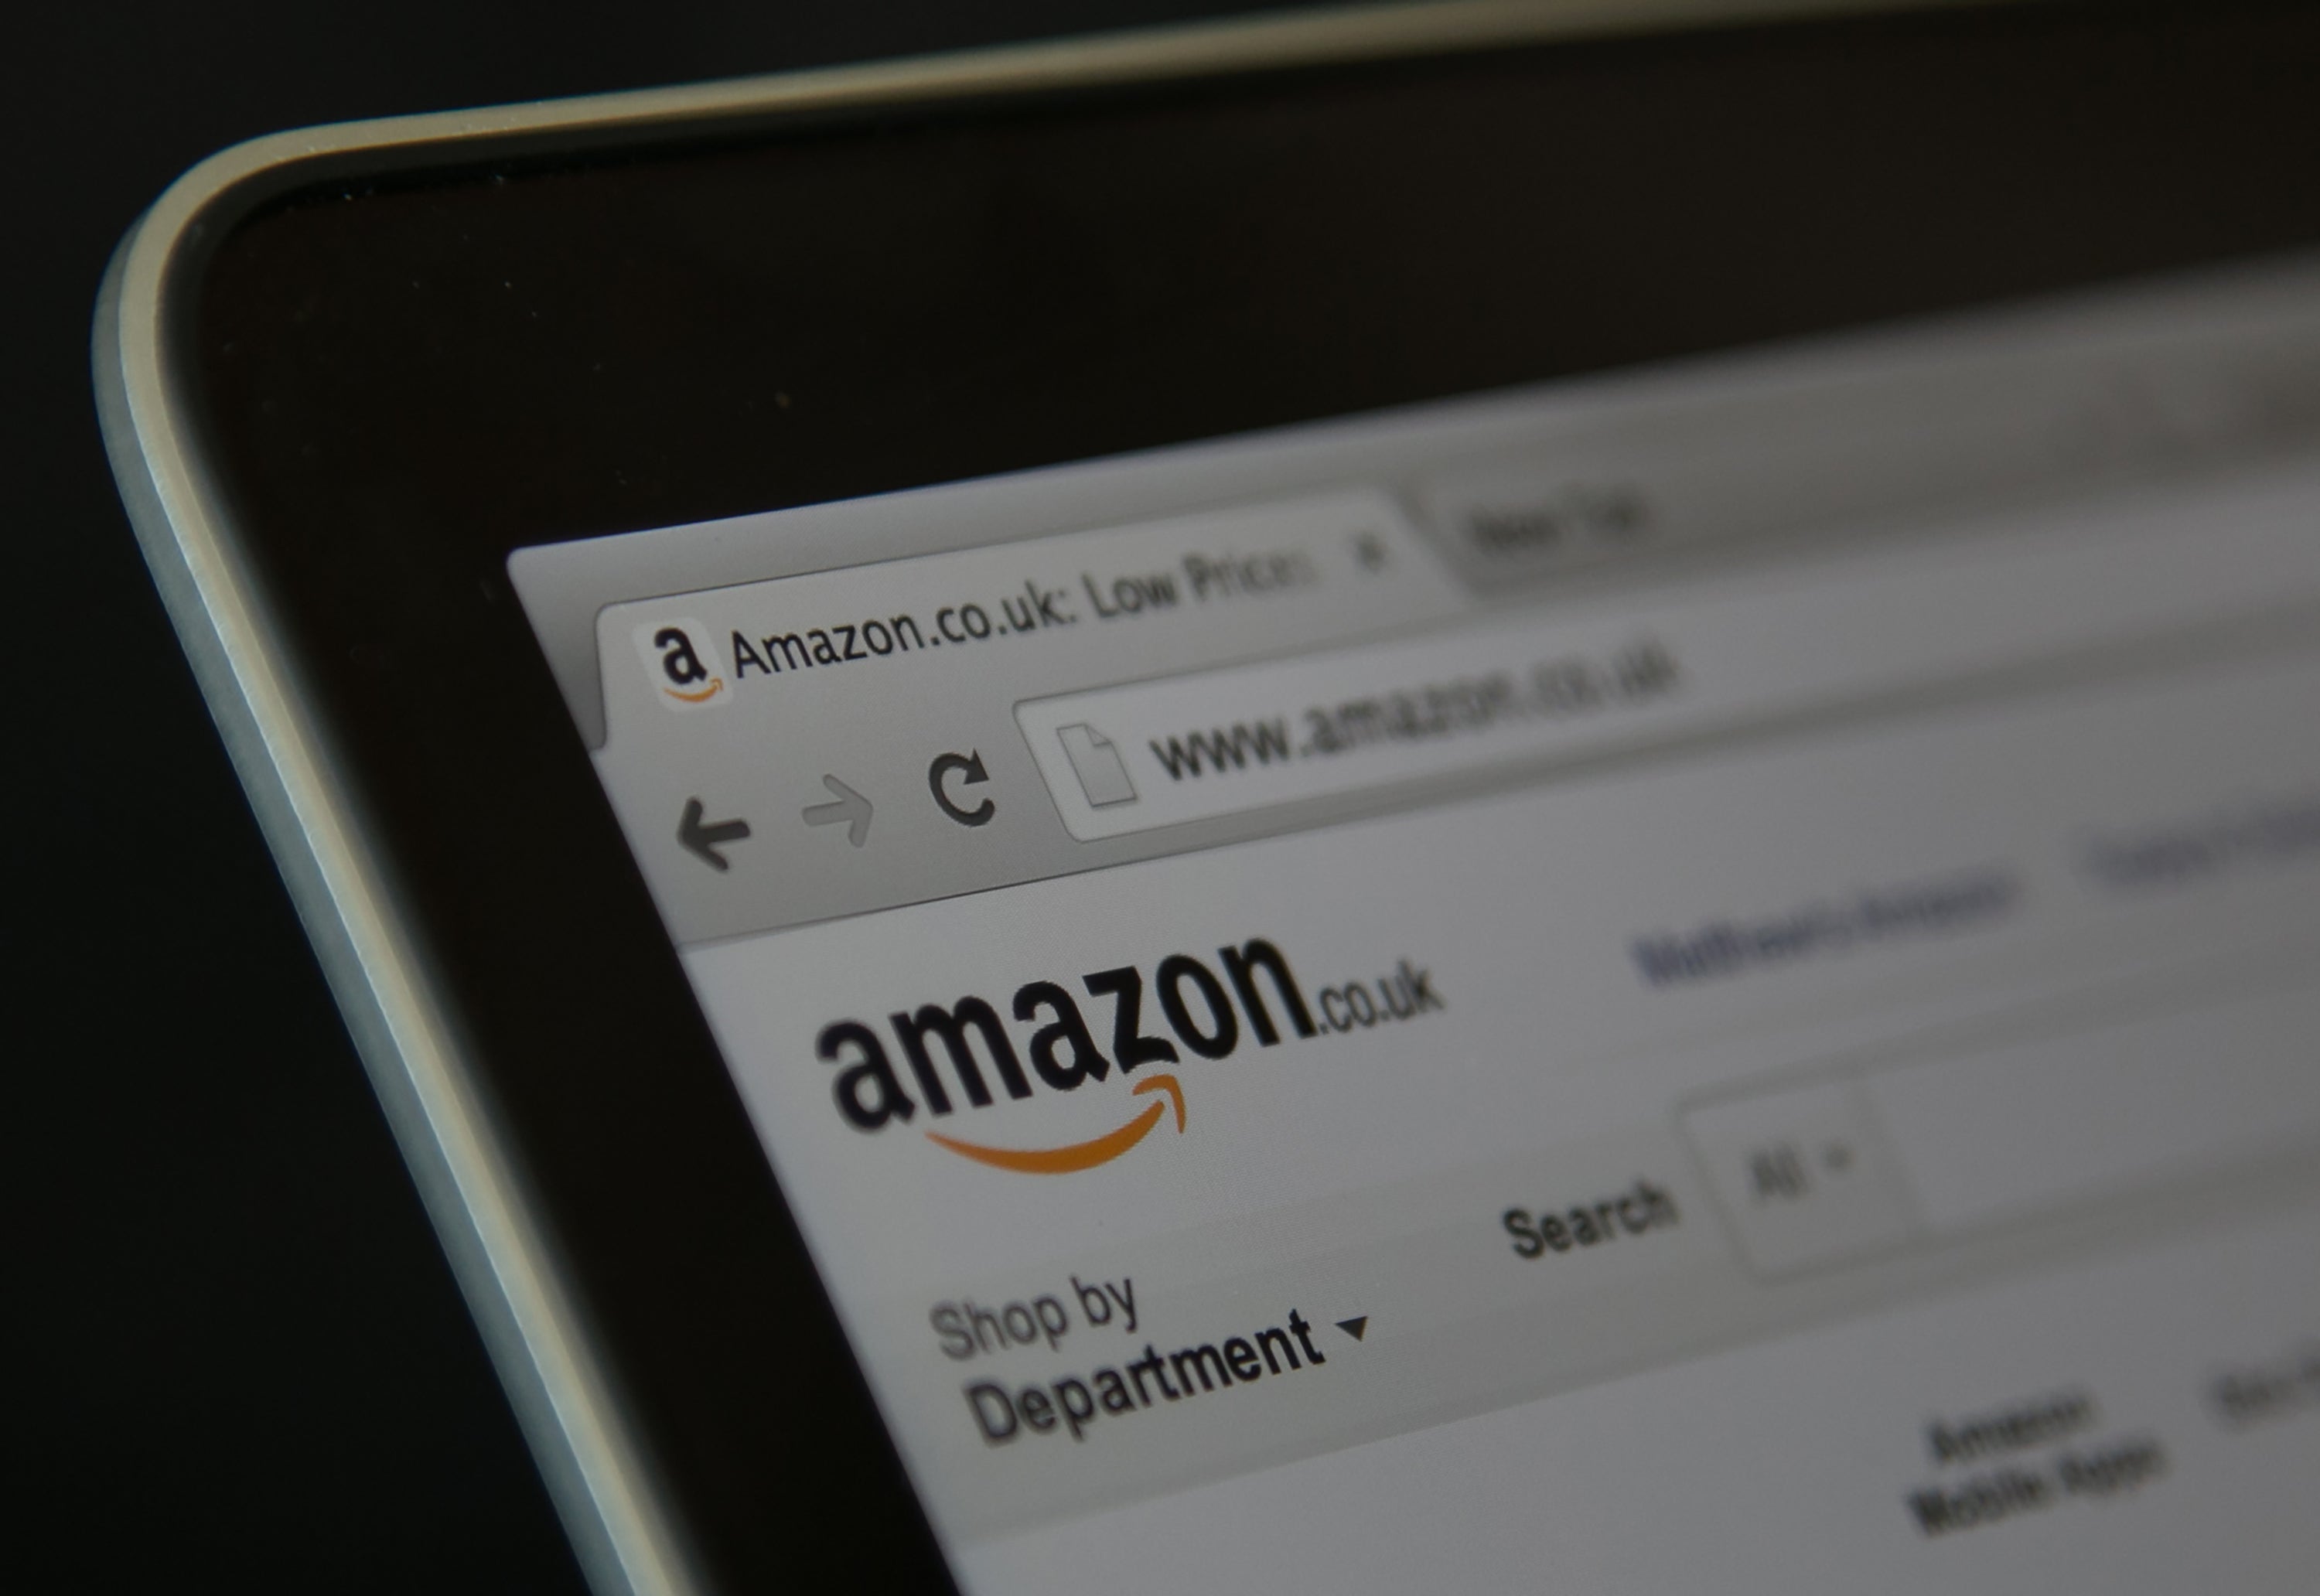 Amazon marks busiest ever online shopping day on Black Friday 2014